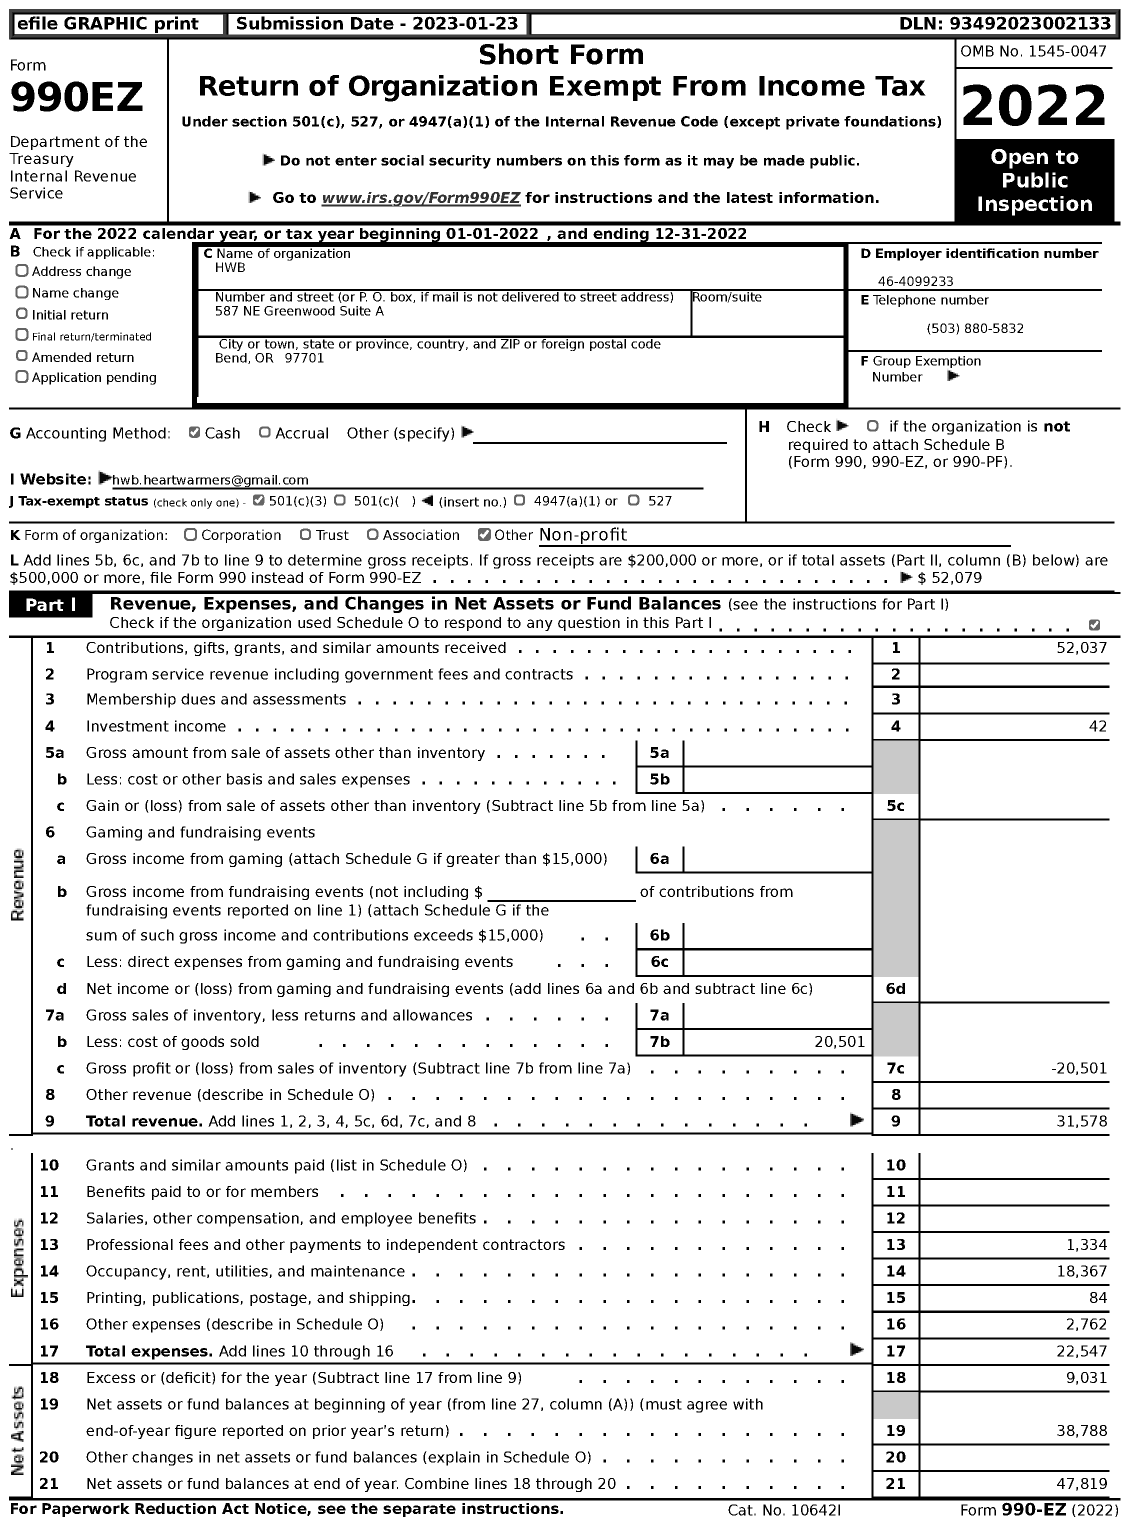 Image of first page of 2022 Form 990EZ for HWB (Heartwarmers)